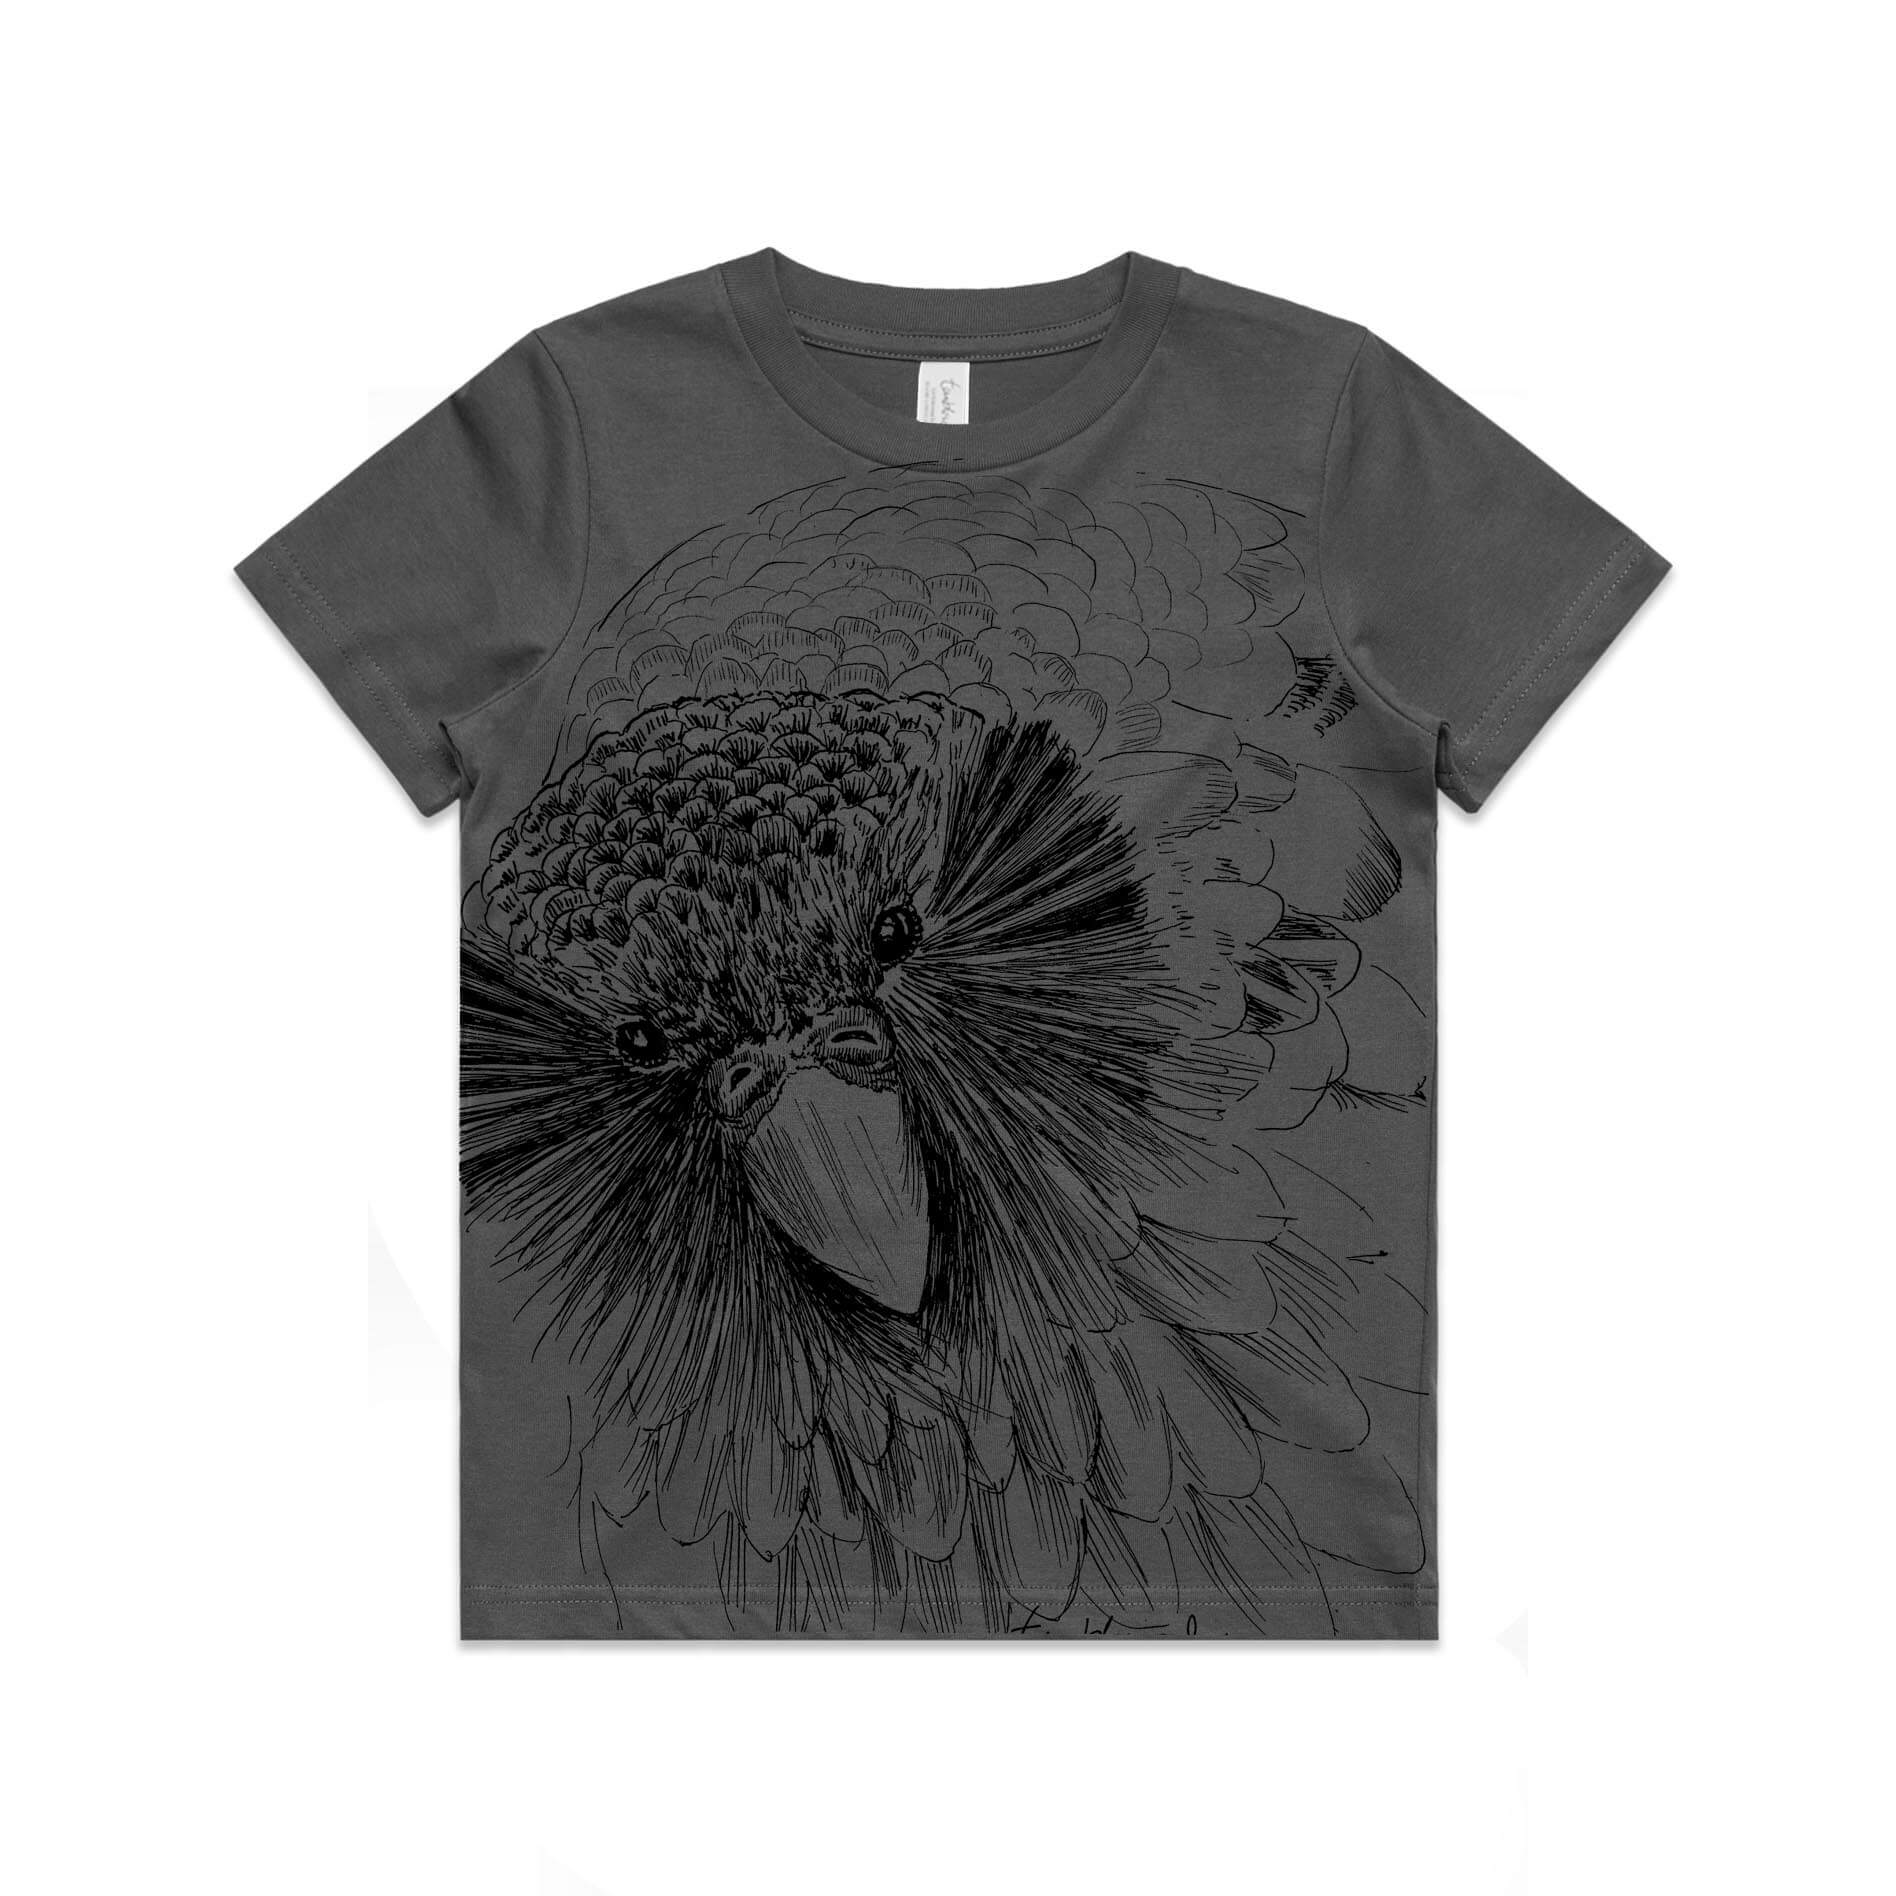 Charcoal, cotton kids' t-shirt with screen printed Sirocco the Kakapo design.